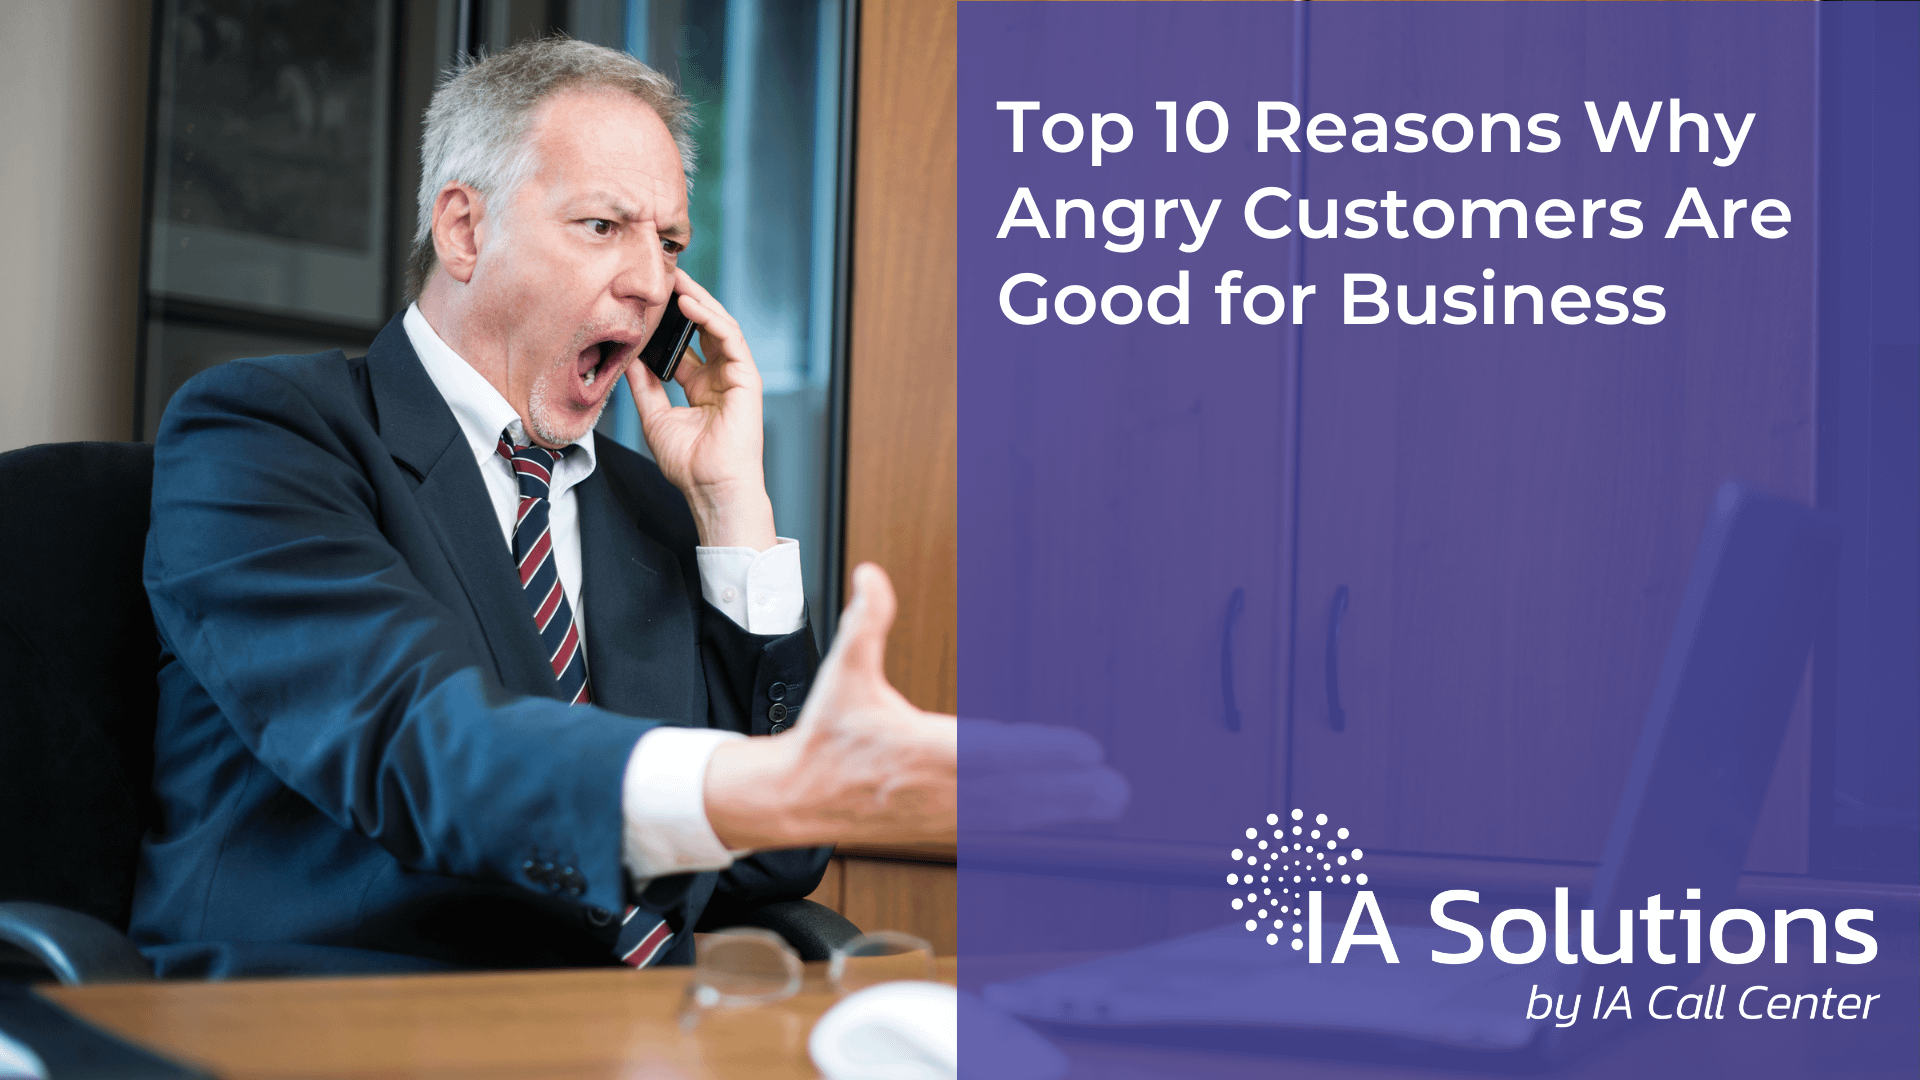 Top 10 reasons angry customers are good for business featured image.